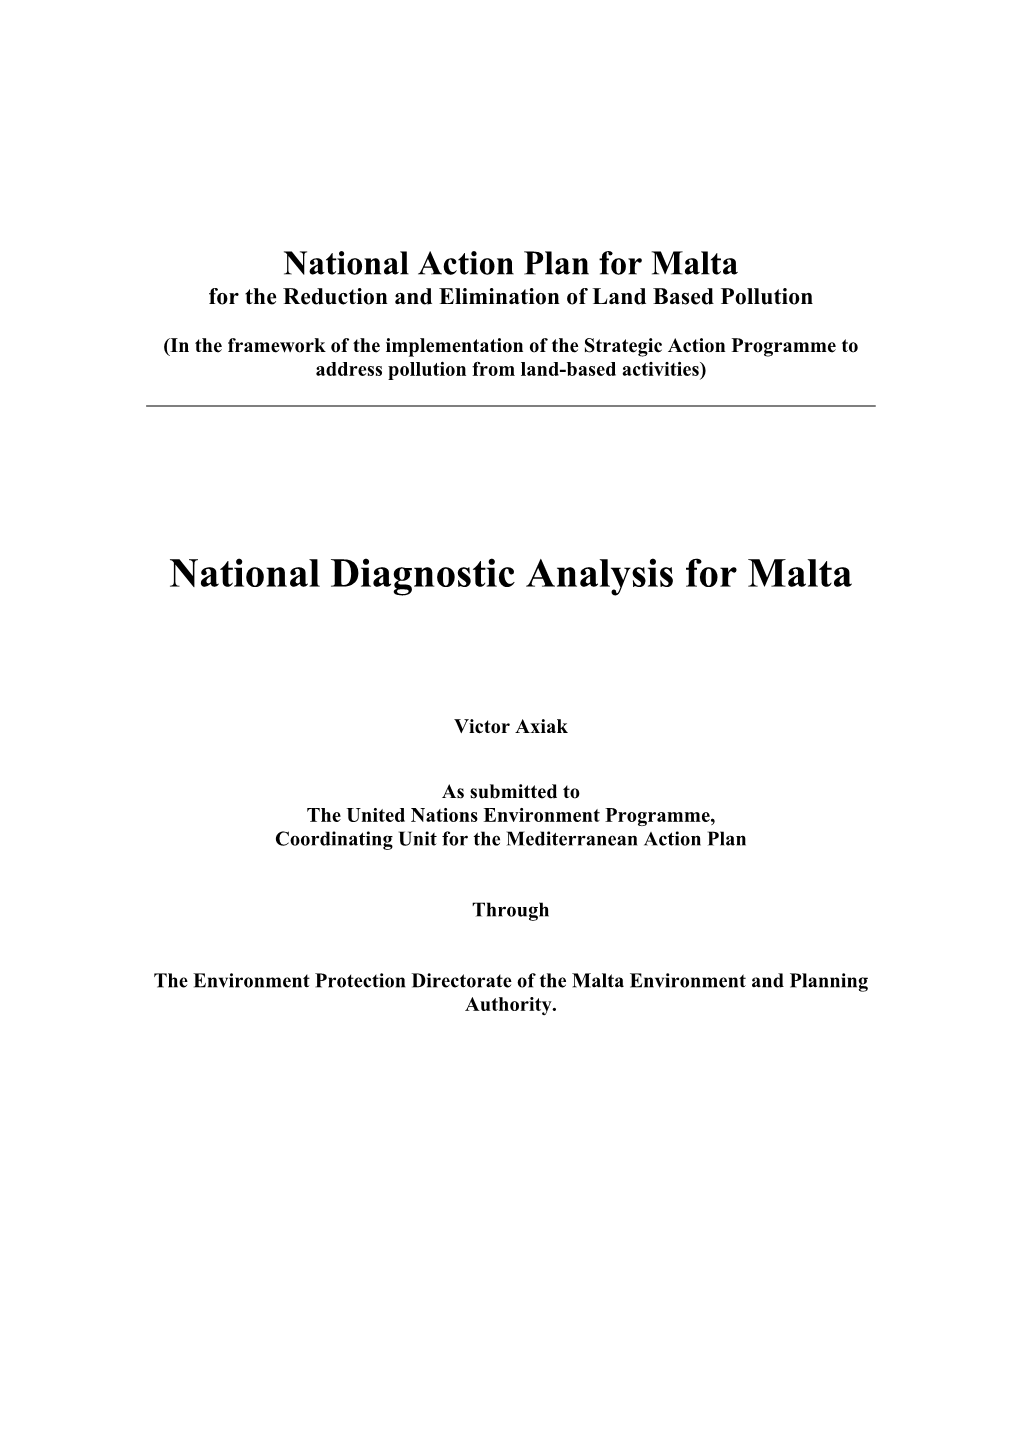 National Action Plan for Malta for the Reduction and Elimination of Land Based Pollution